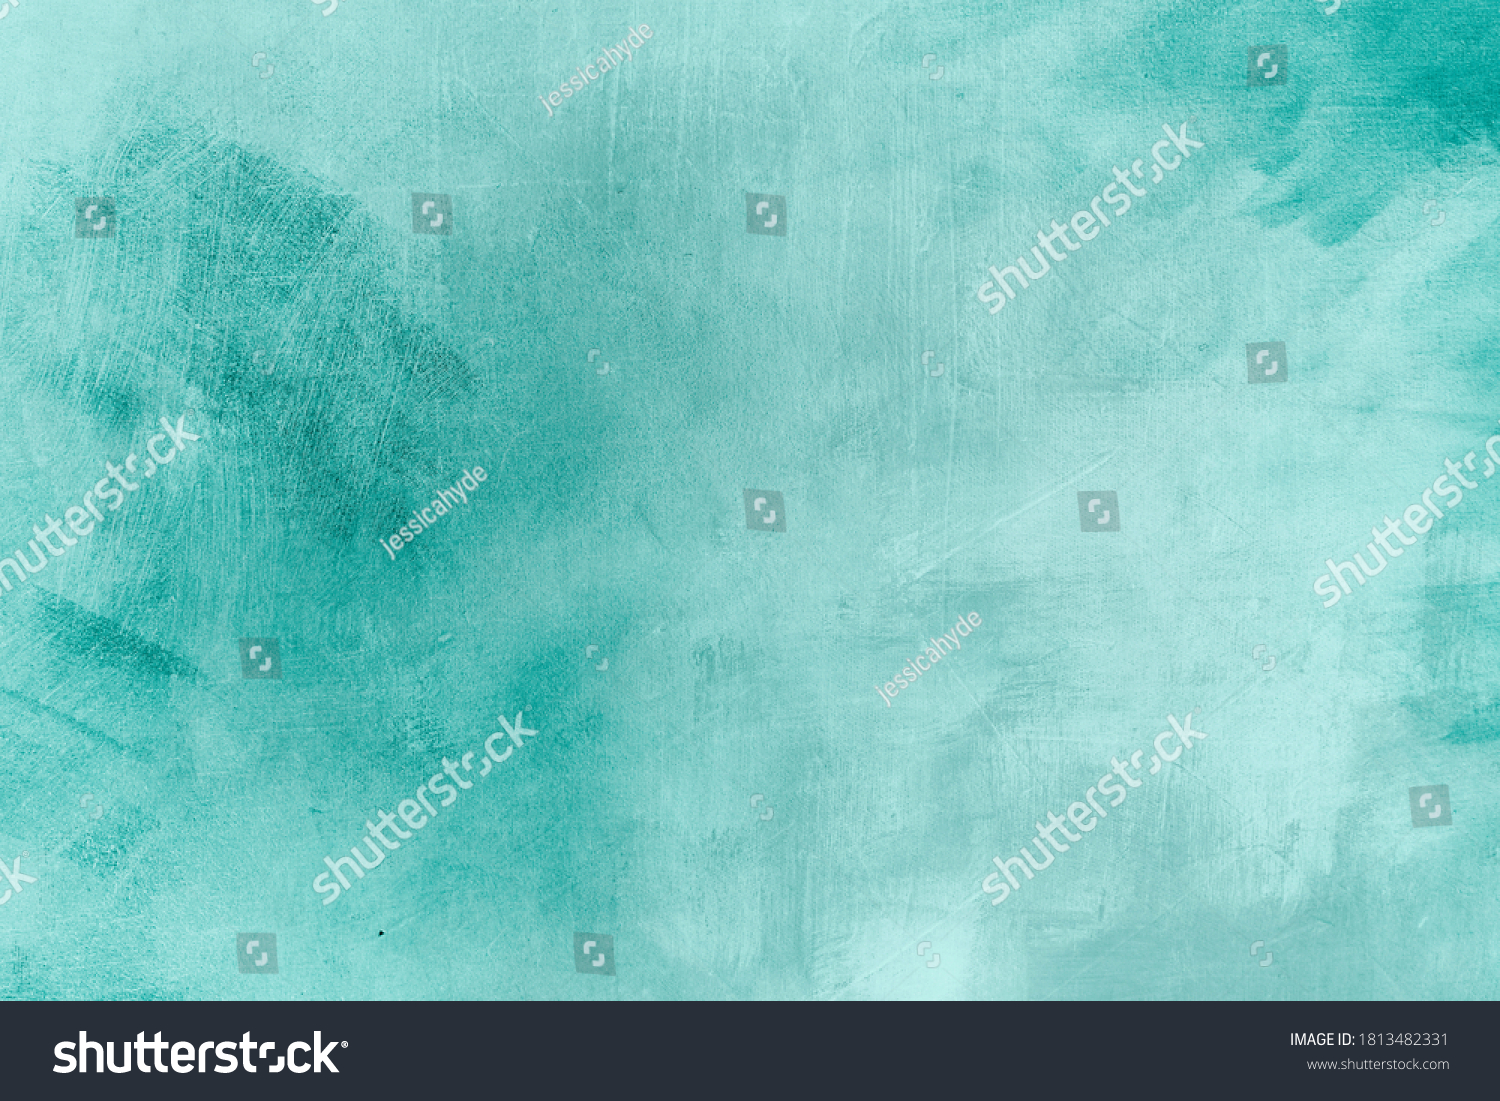 Blue green abstract background or texture  #1813482331